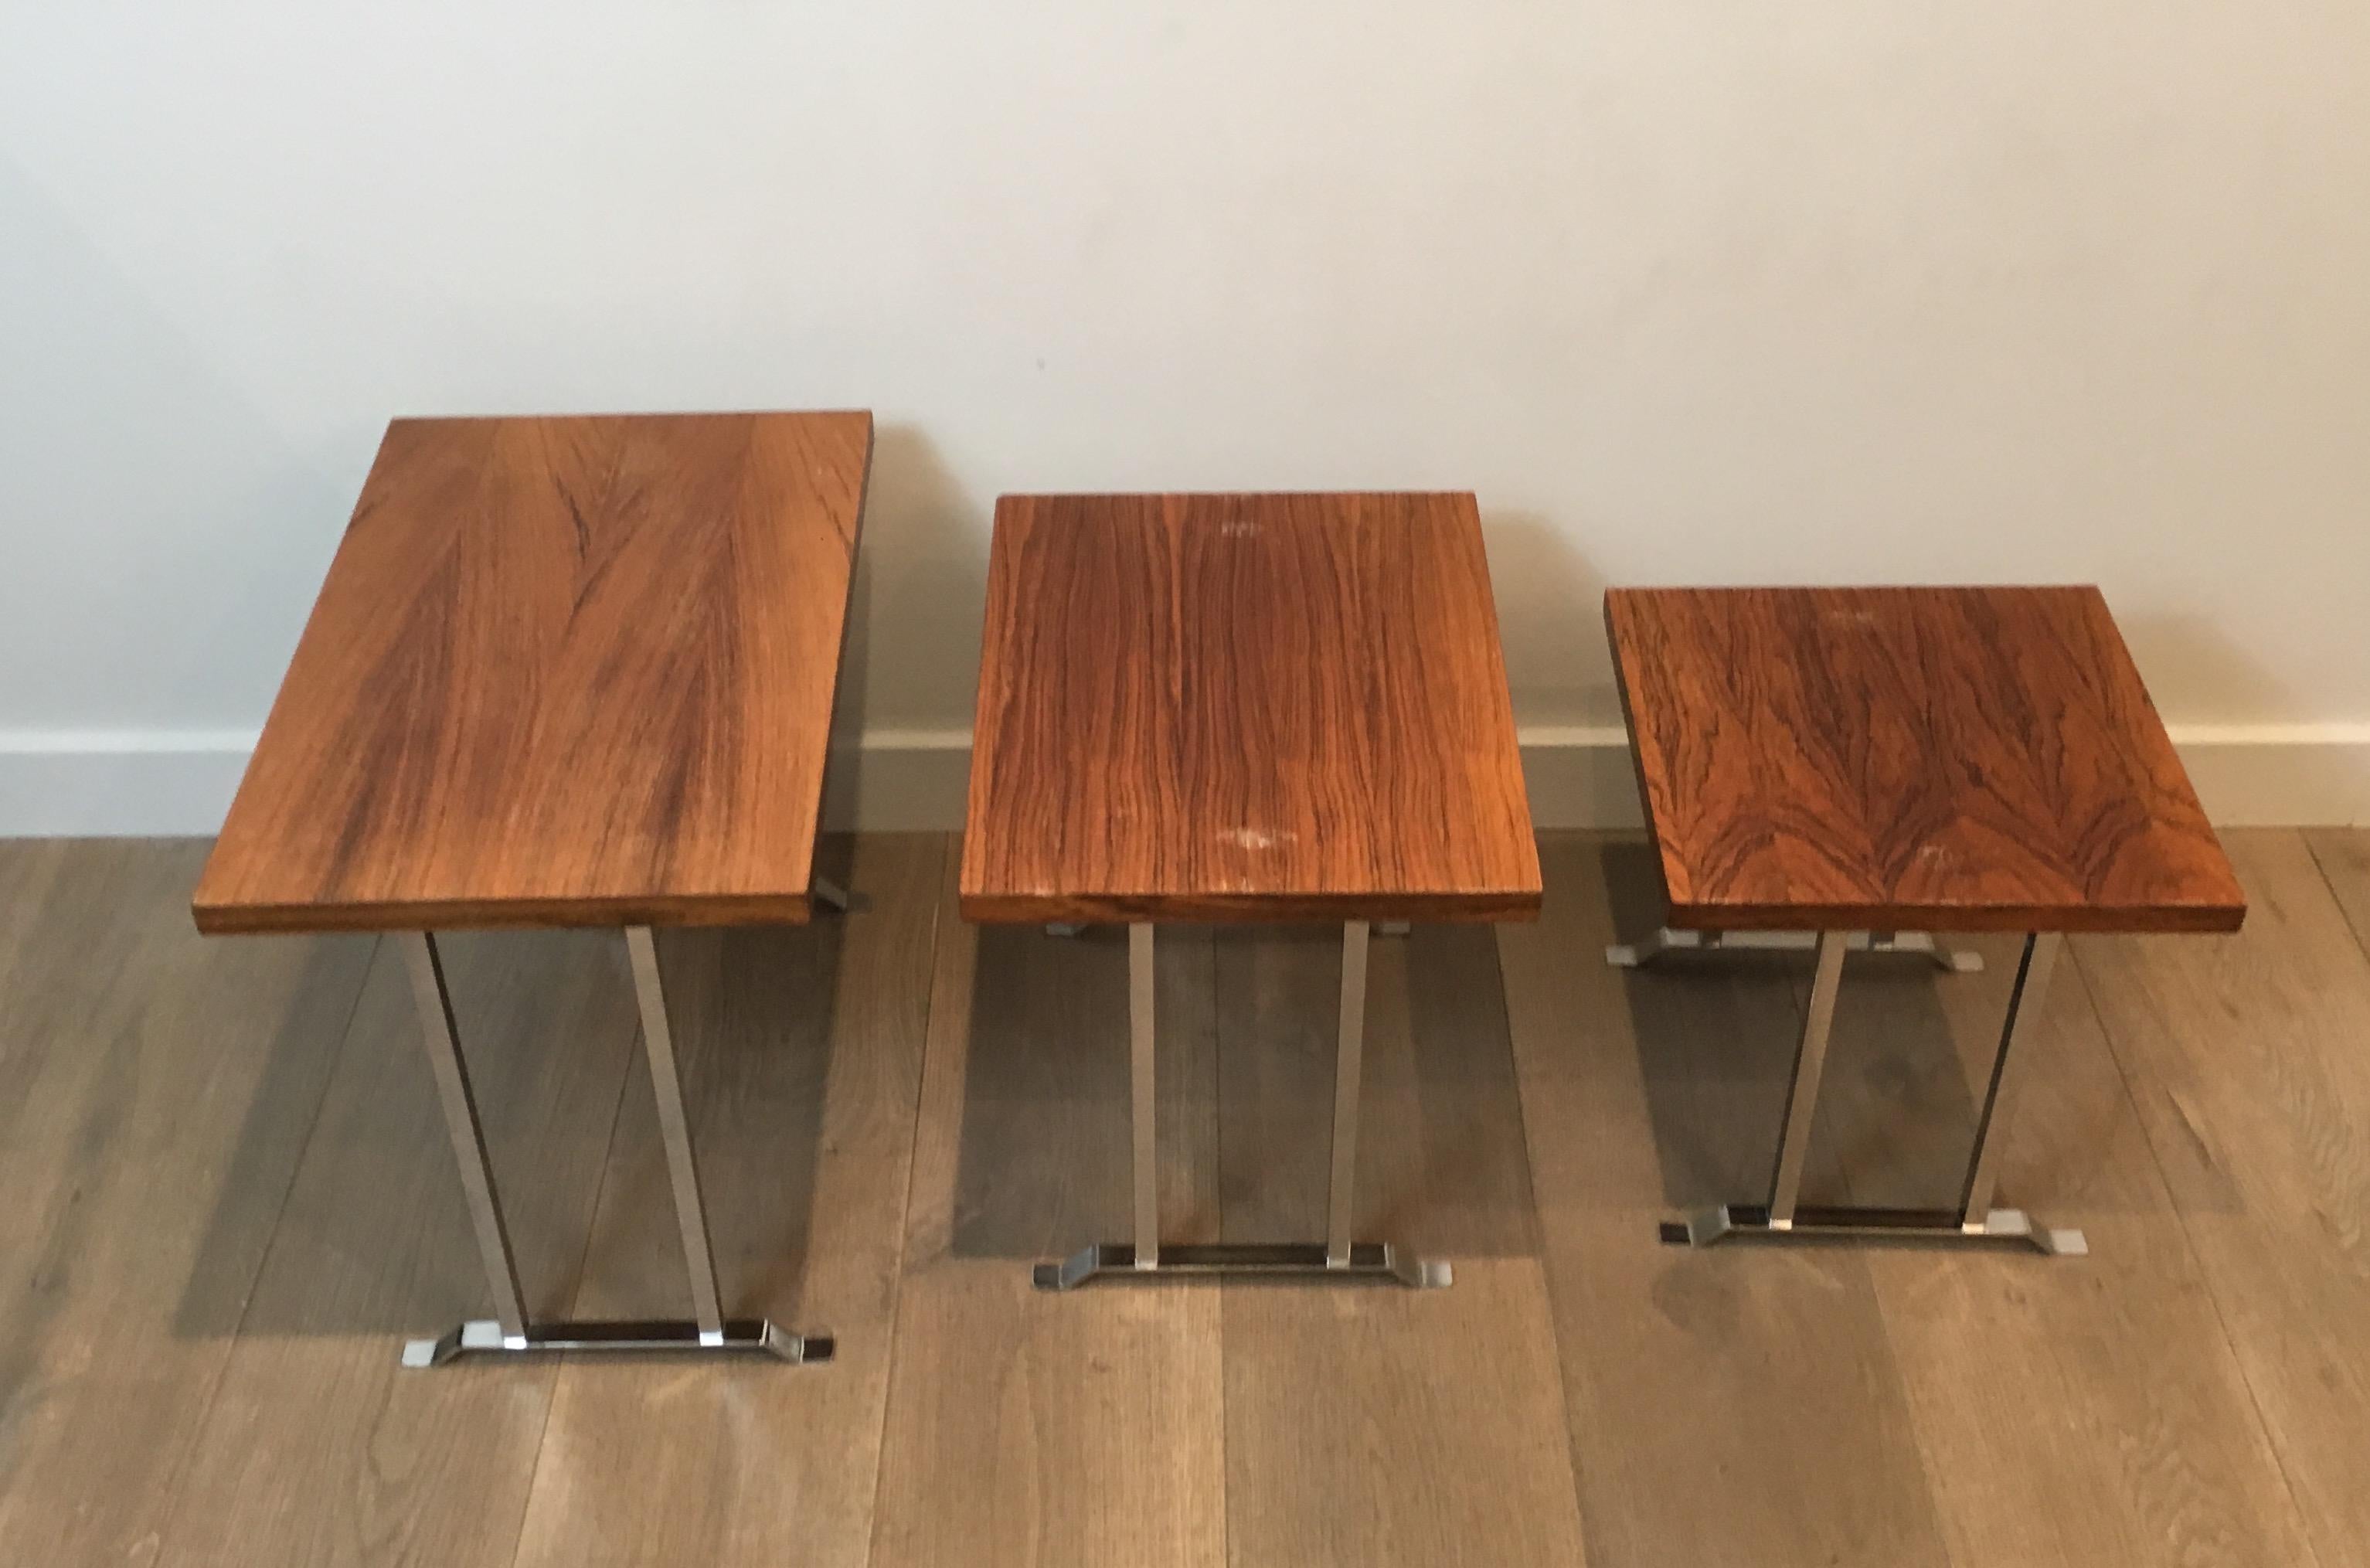 Set of 3 Exotic Wood and Chrome Nesting Tables, French, circa 1970 For Sale 8